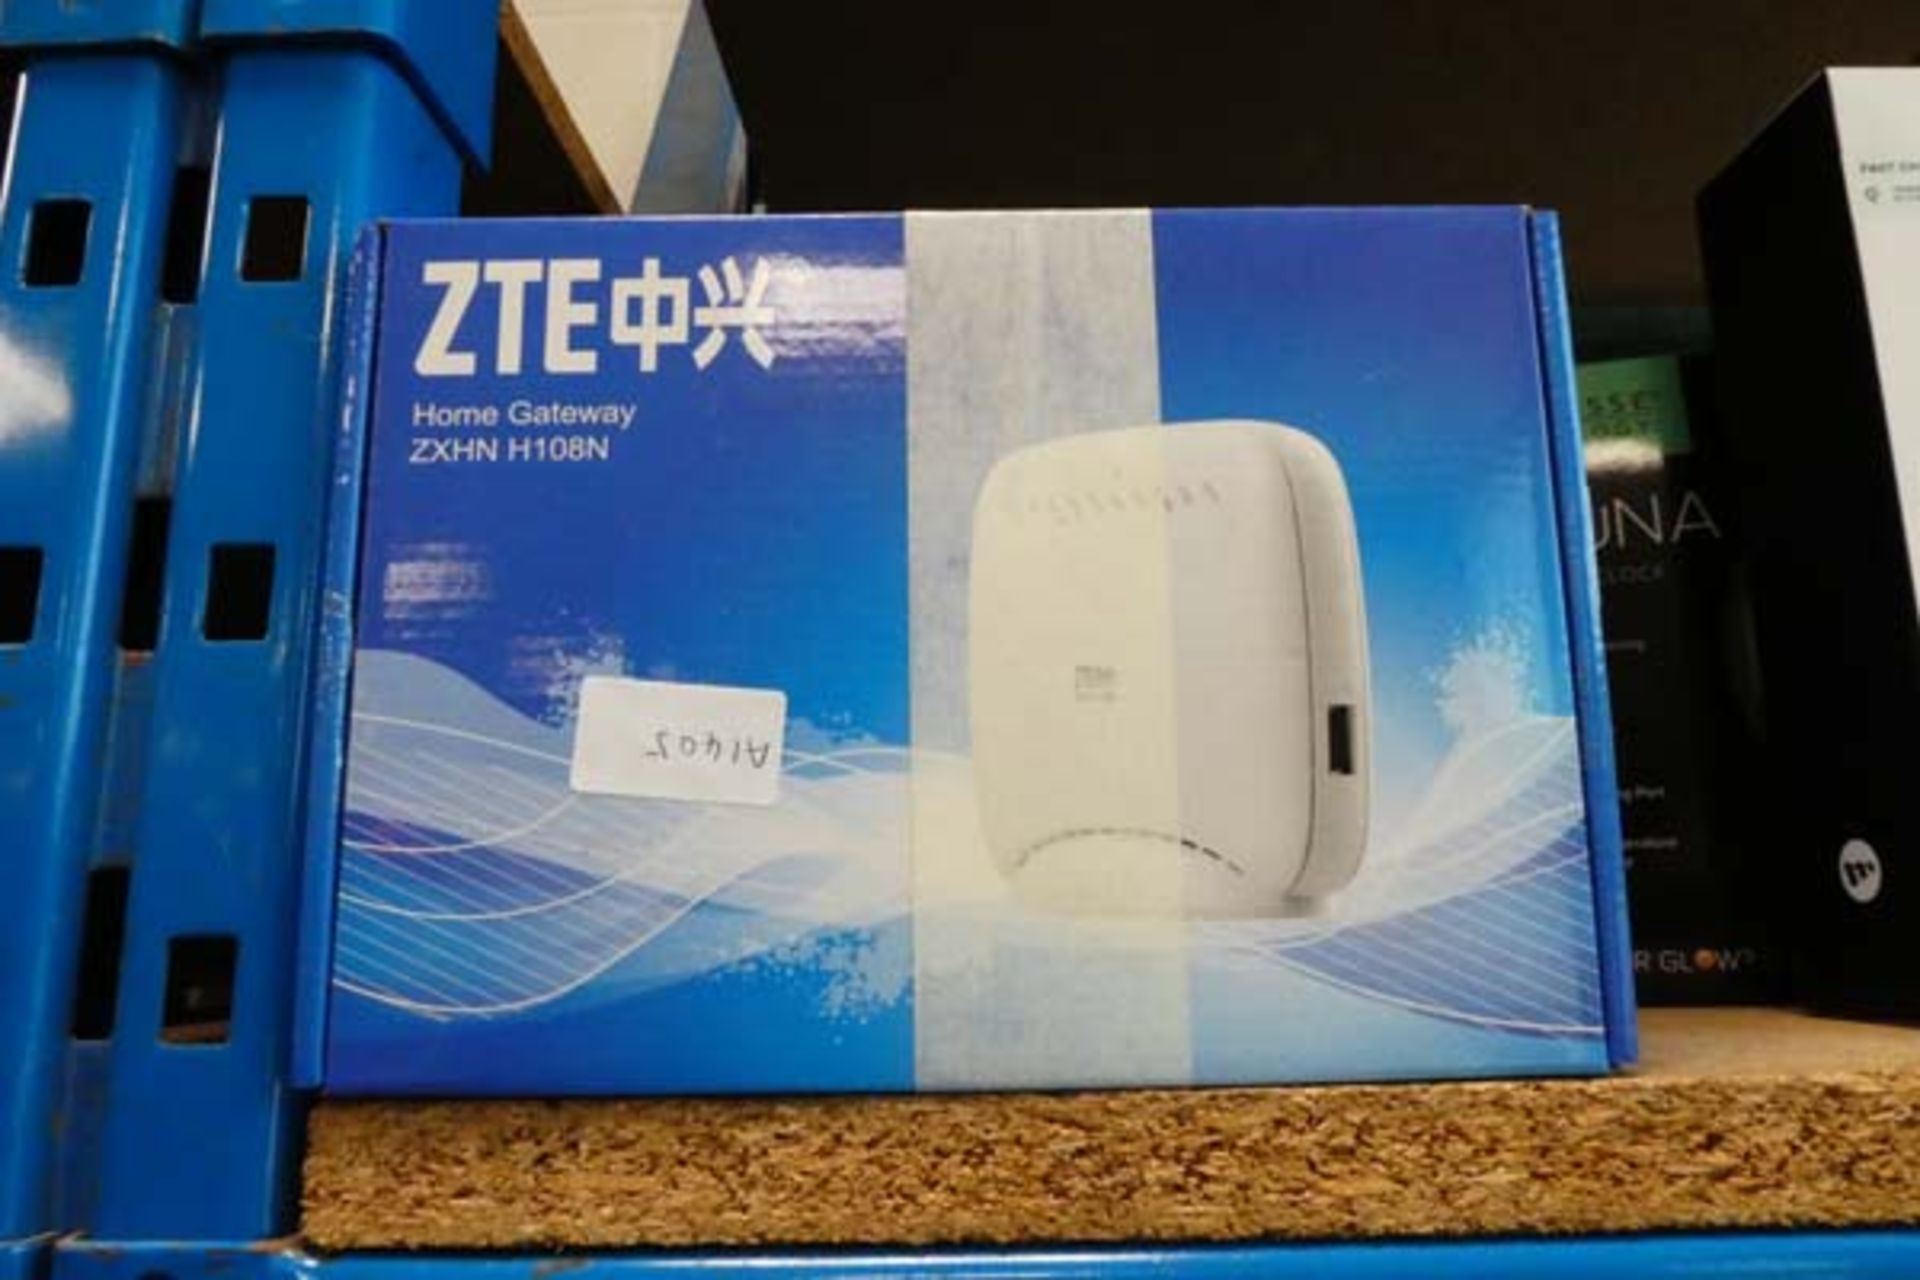 3x ZTE routers in boxes